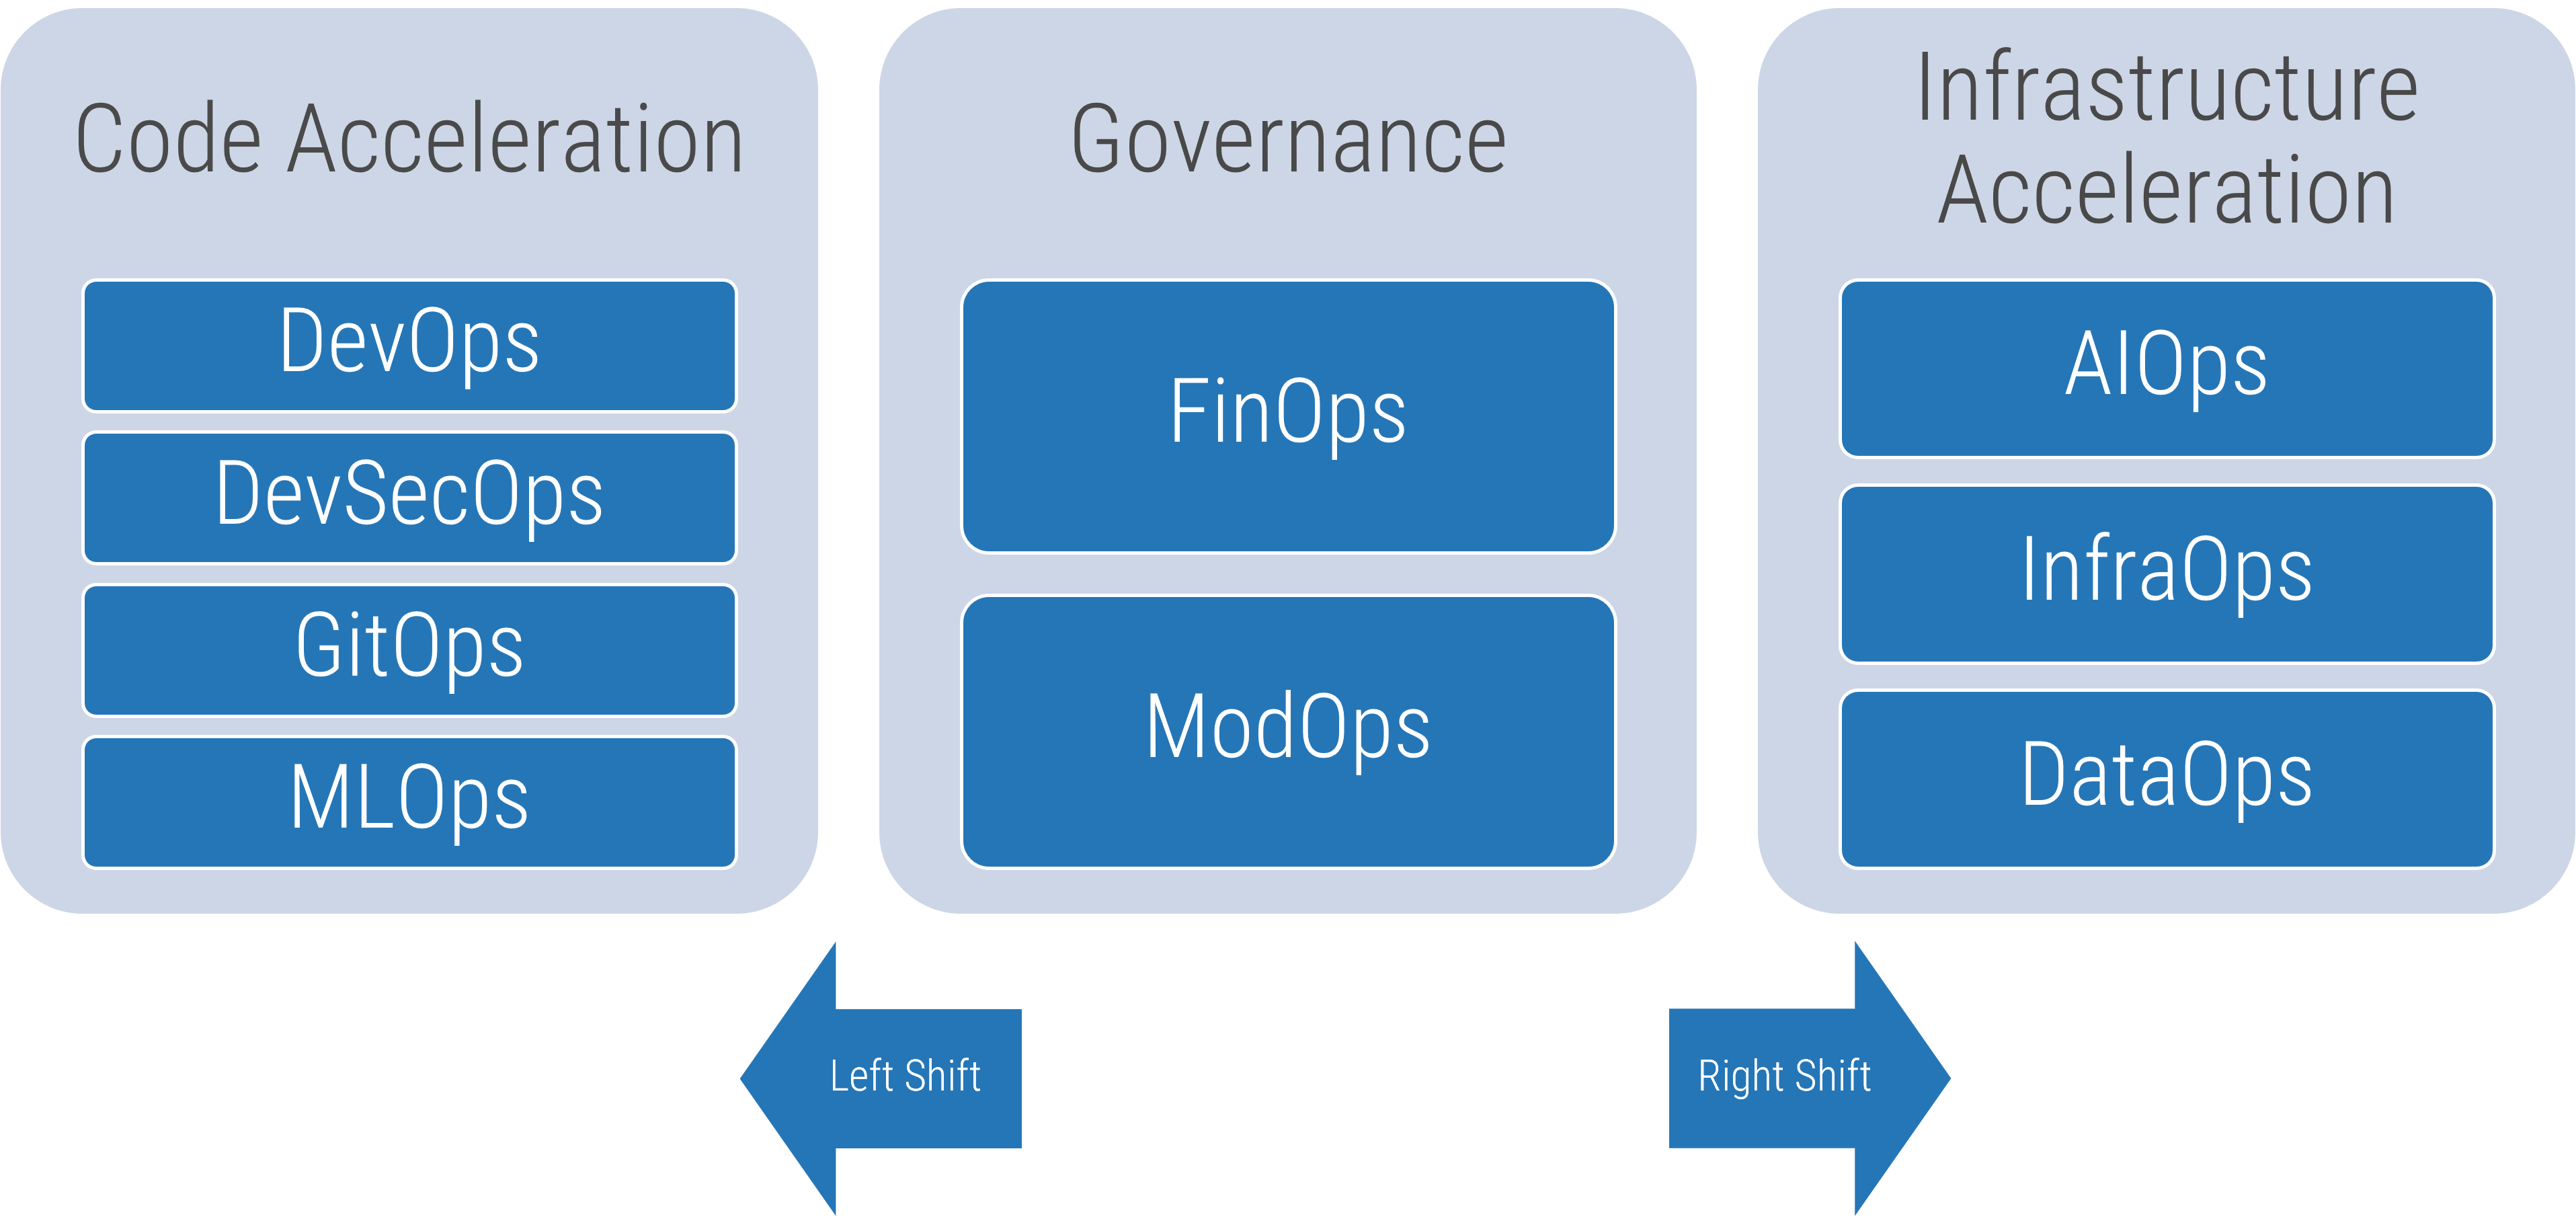 This is an image of the xOps spectrum. The three main parts are: Code Acceleration (left), Governance(middle), and Infrastructure Acceleration (right)